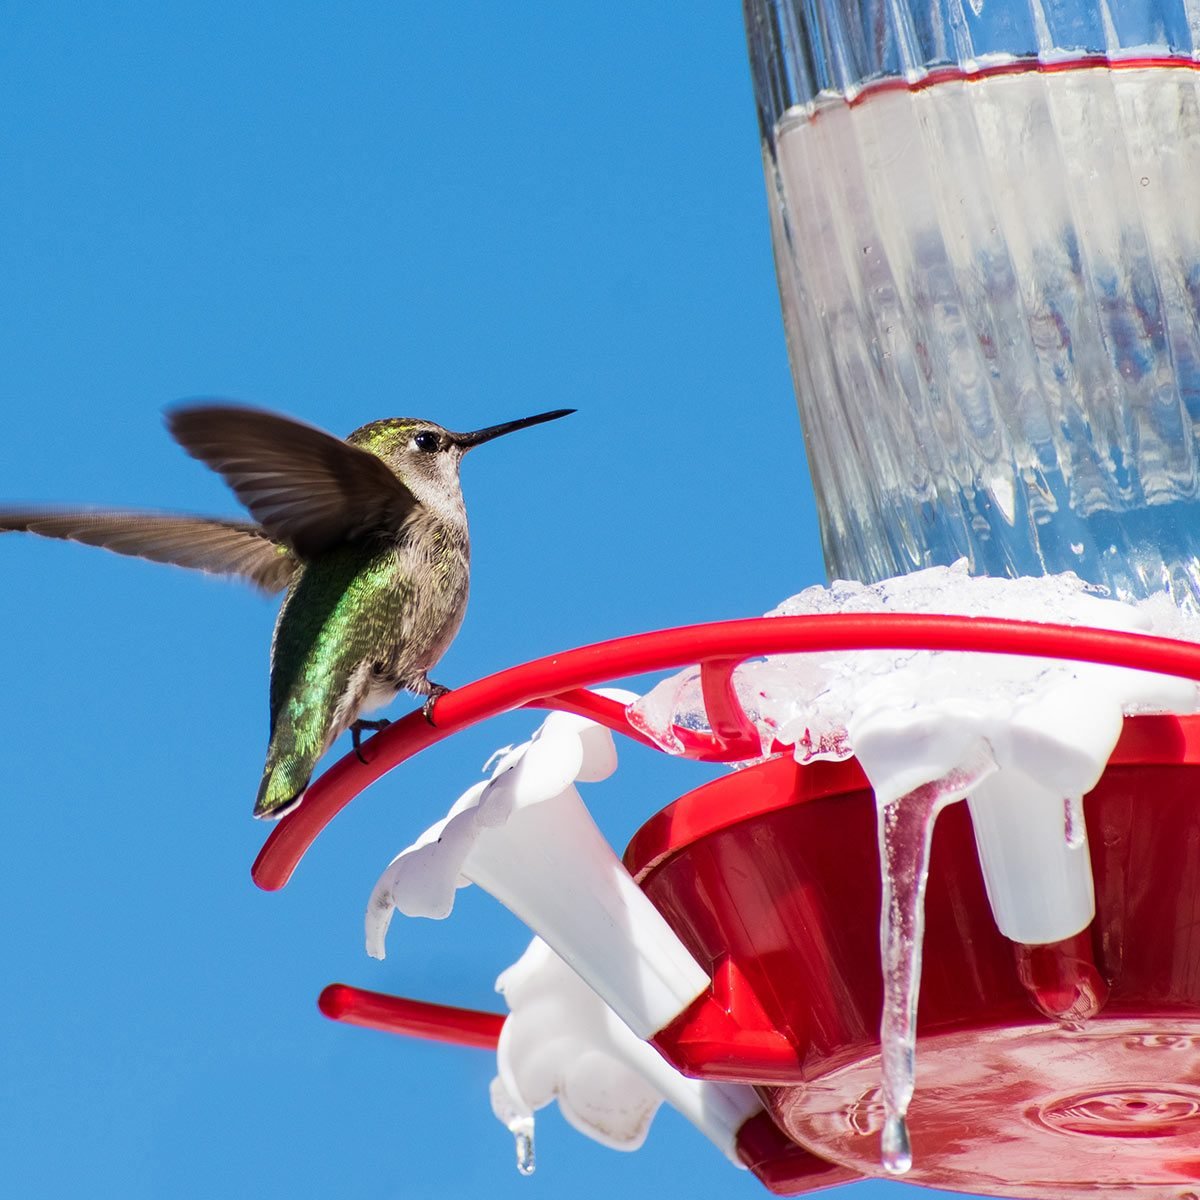 Where Do Hummingbirds Live In the Winter?